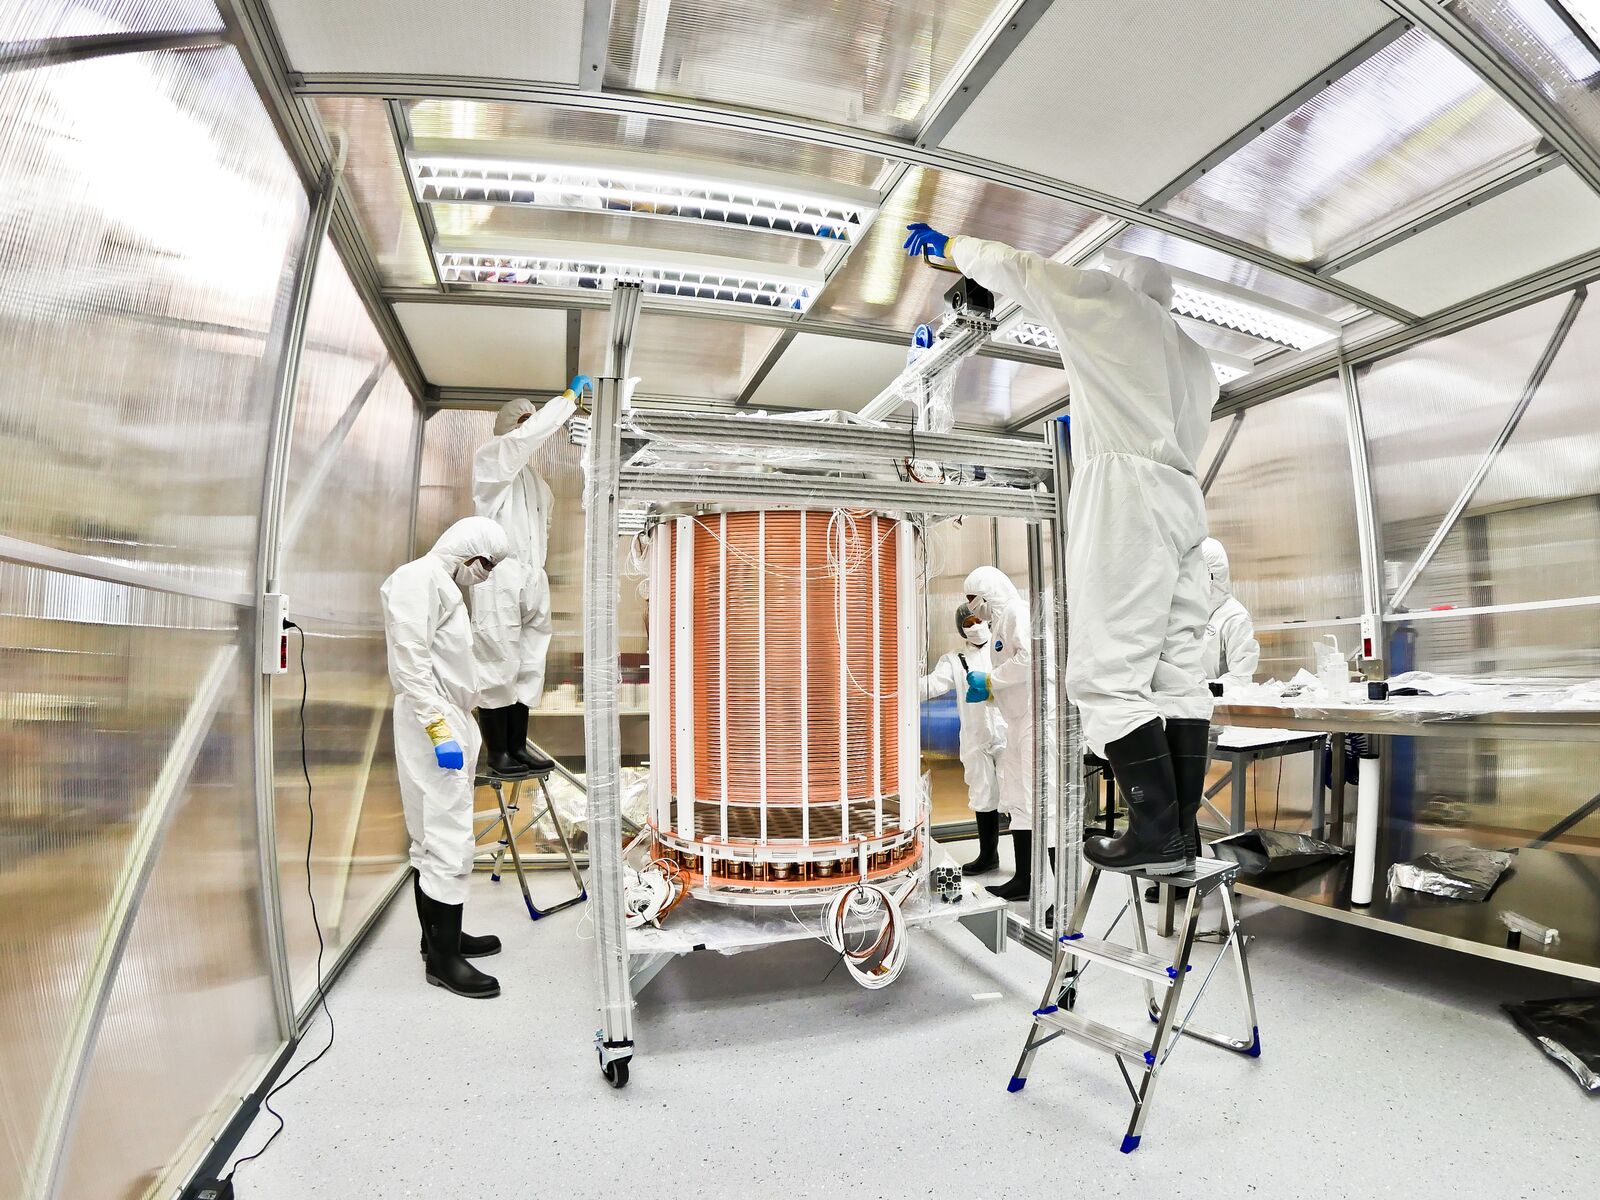 Scientists assemble the XENON1T dark matter detector in the Gran Sasso Underground Laboratory in Italy. UChicago physicist Luca Grandi and his research group played a key role in preparing and assembling the xenon detector.  Courtesy of XENON1T Collaboration